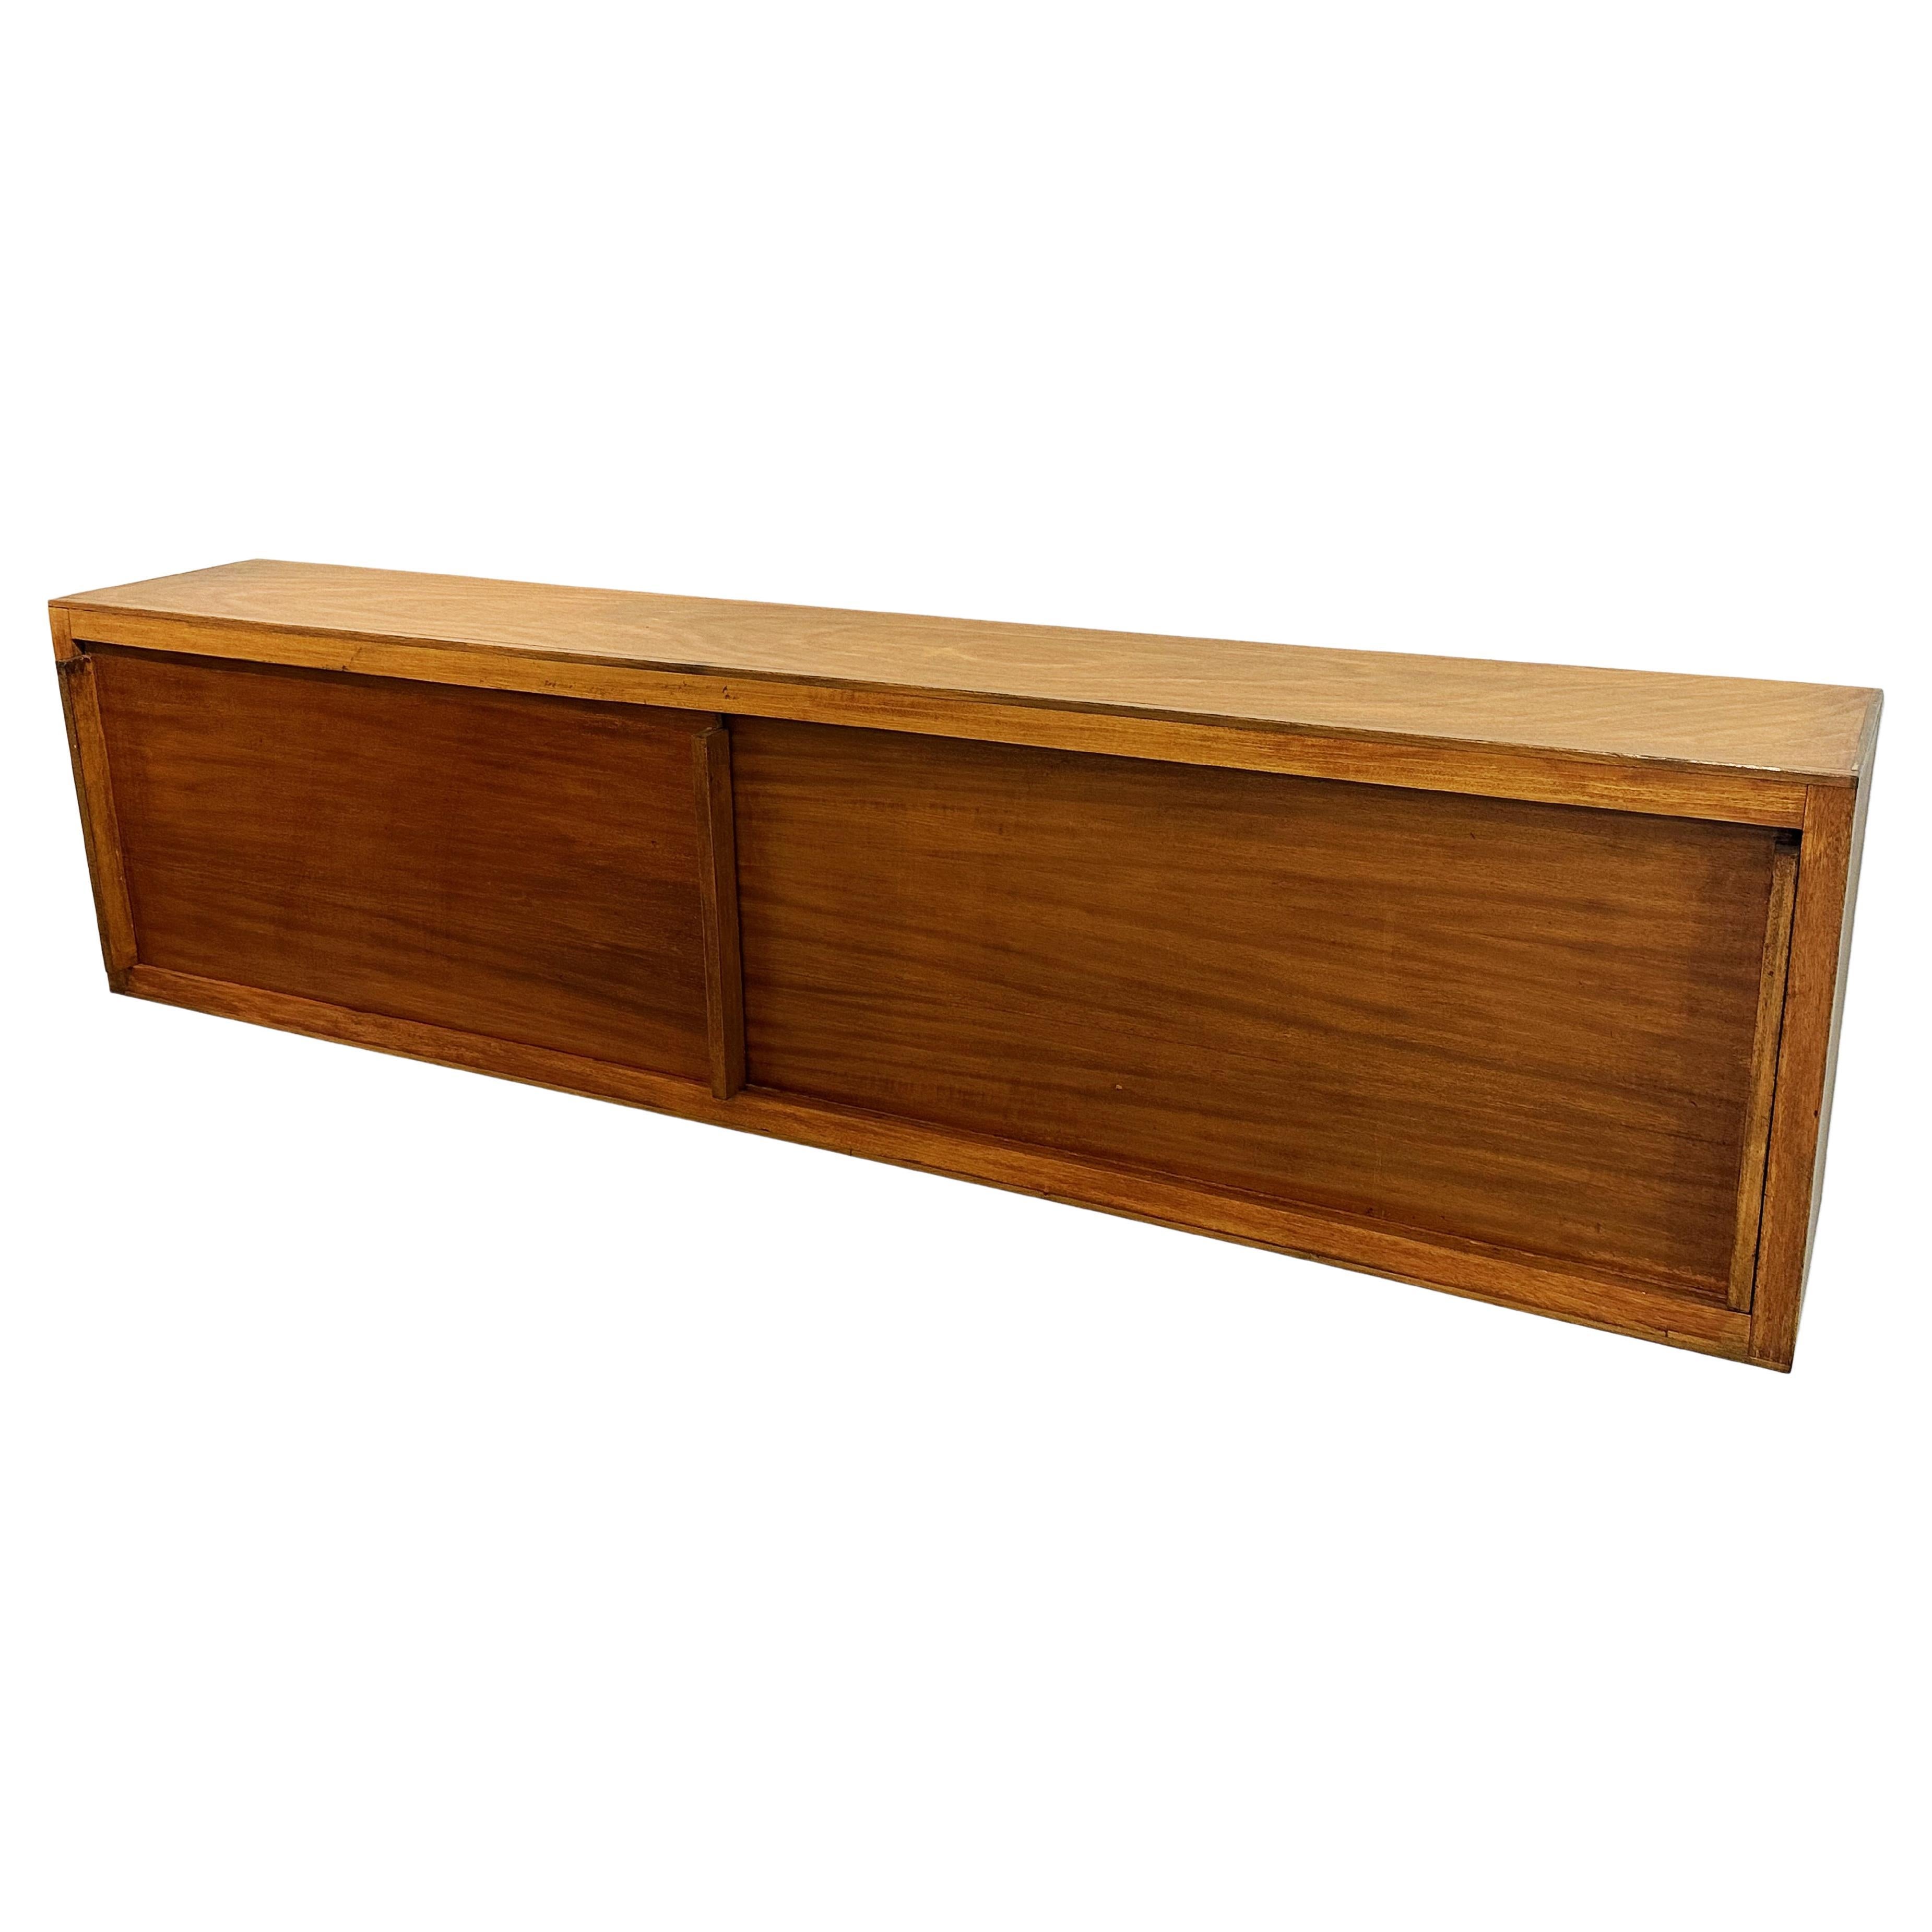 1964. Rare sideboard by André Wogenscky & Marta Pan For Sale